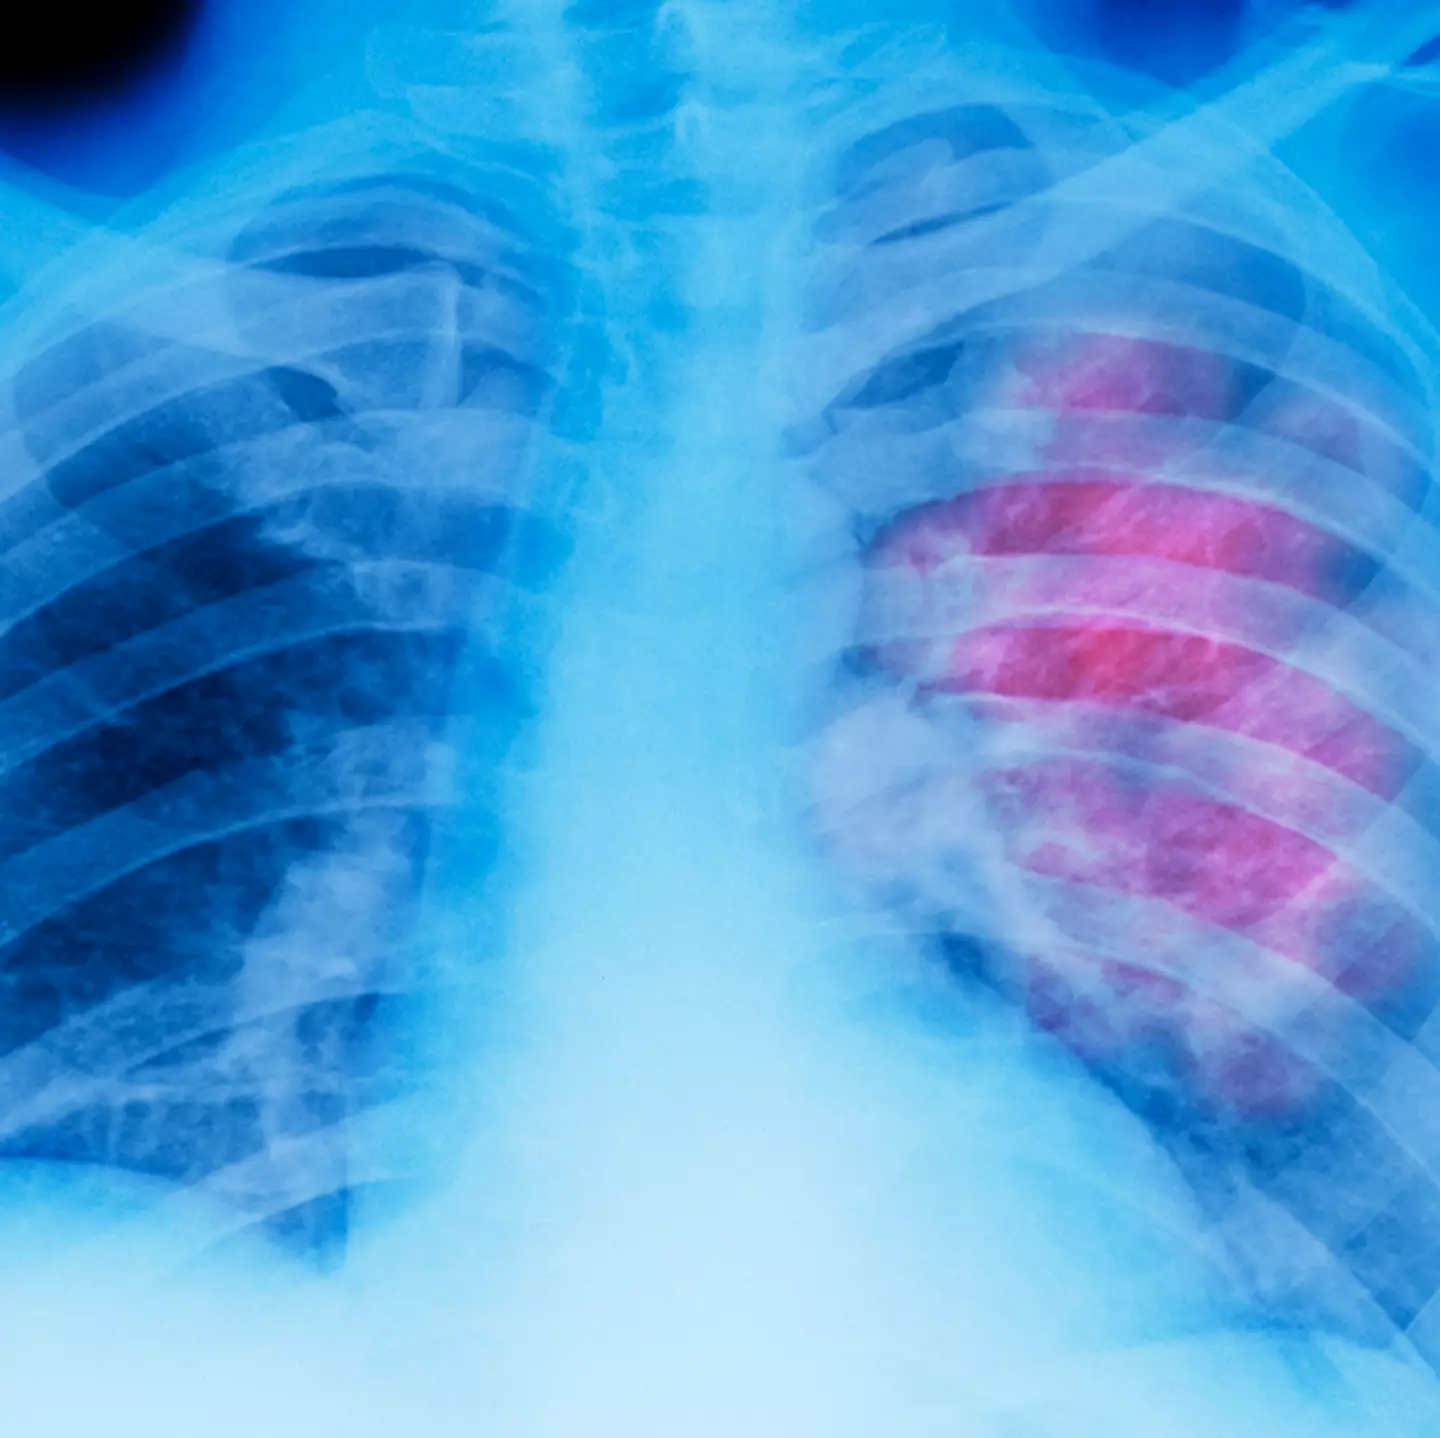 'Groundbreaking' lung cancer vaccine is being developed